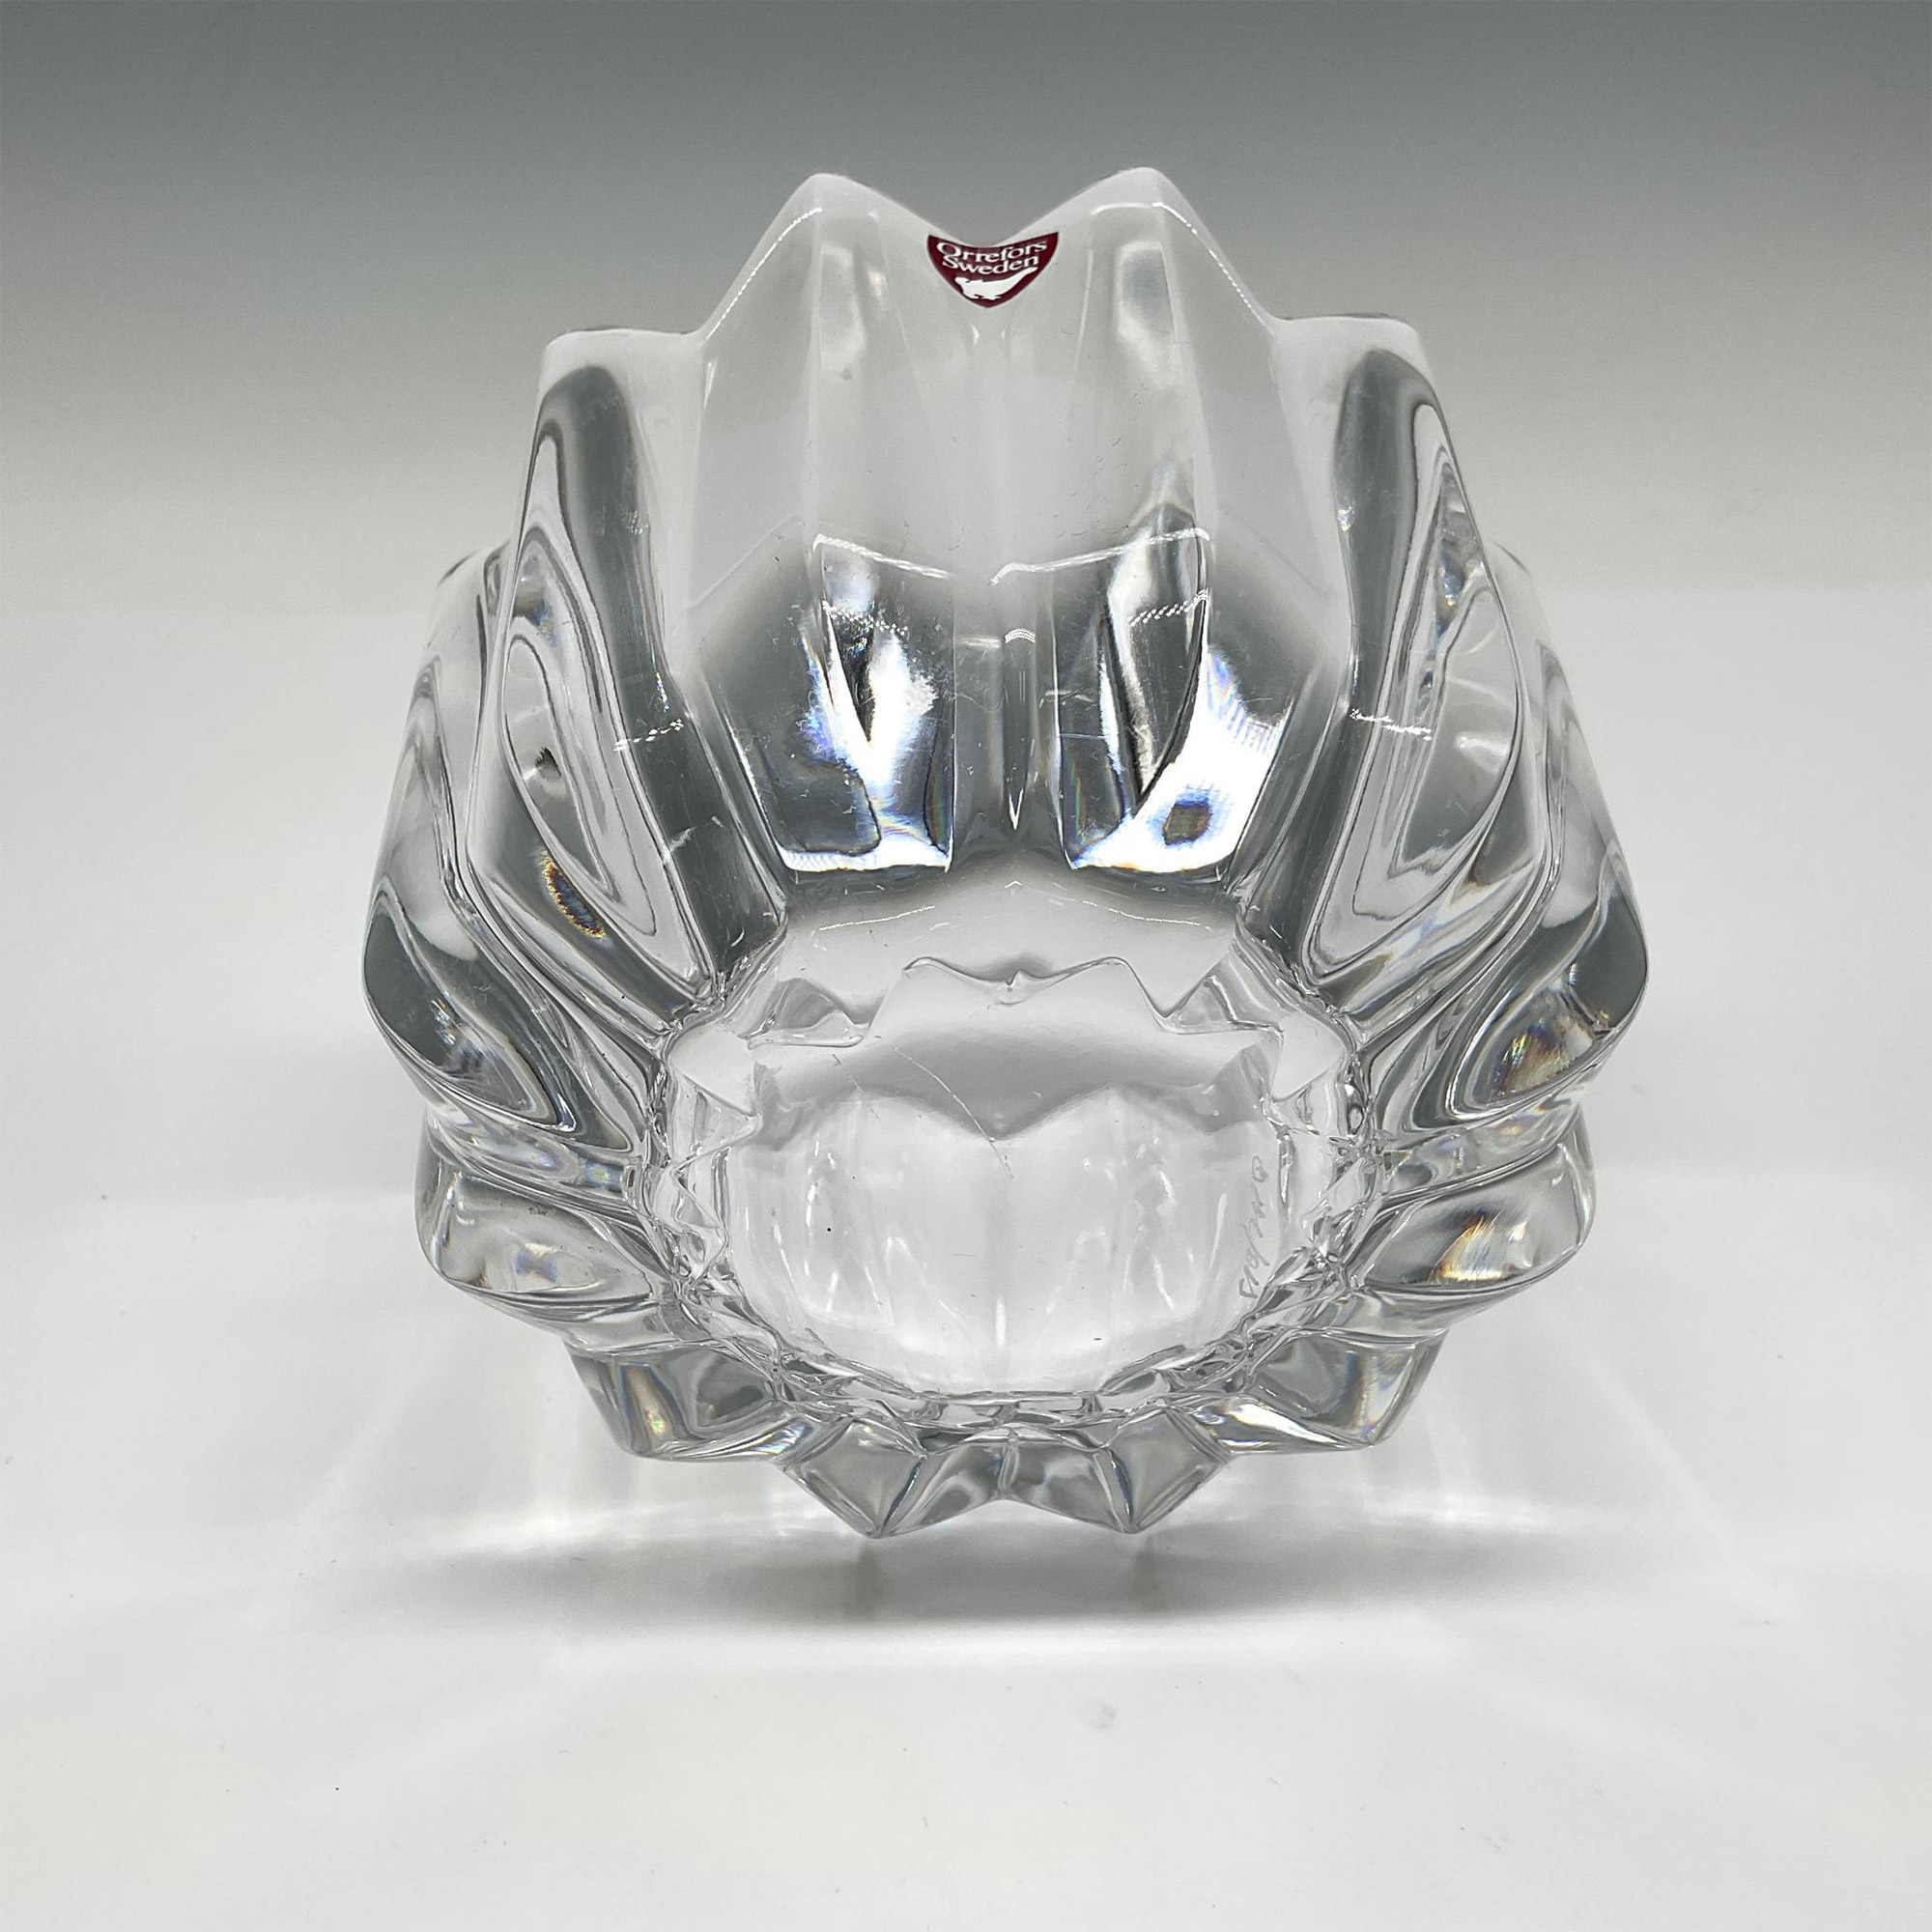 Orrefors Crystal Bowl, Small - Image 3 of 3